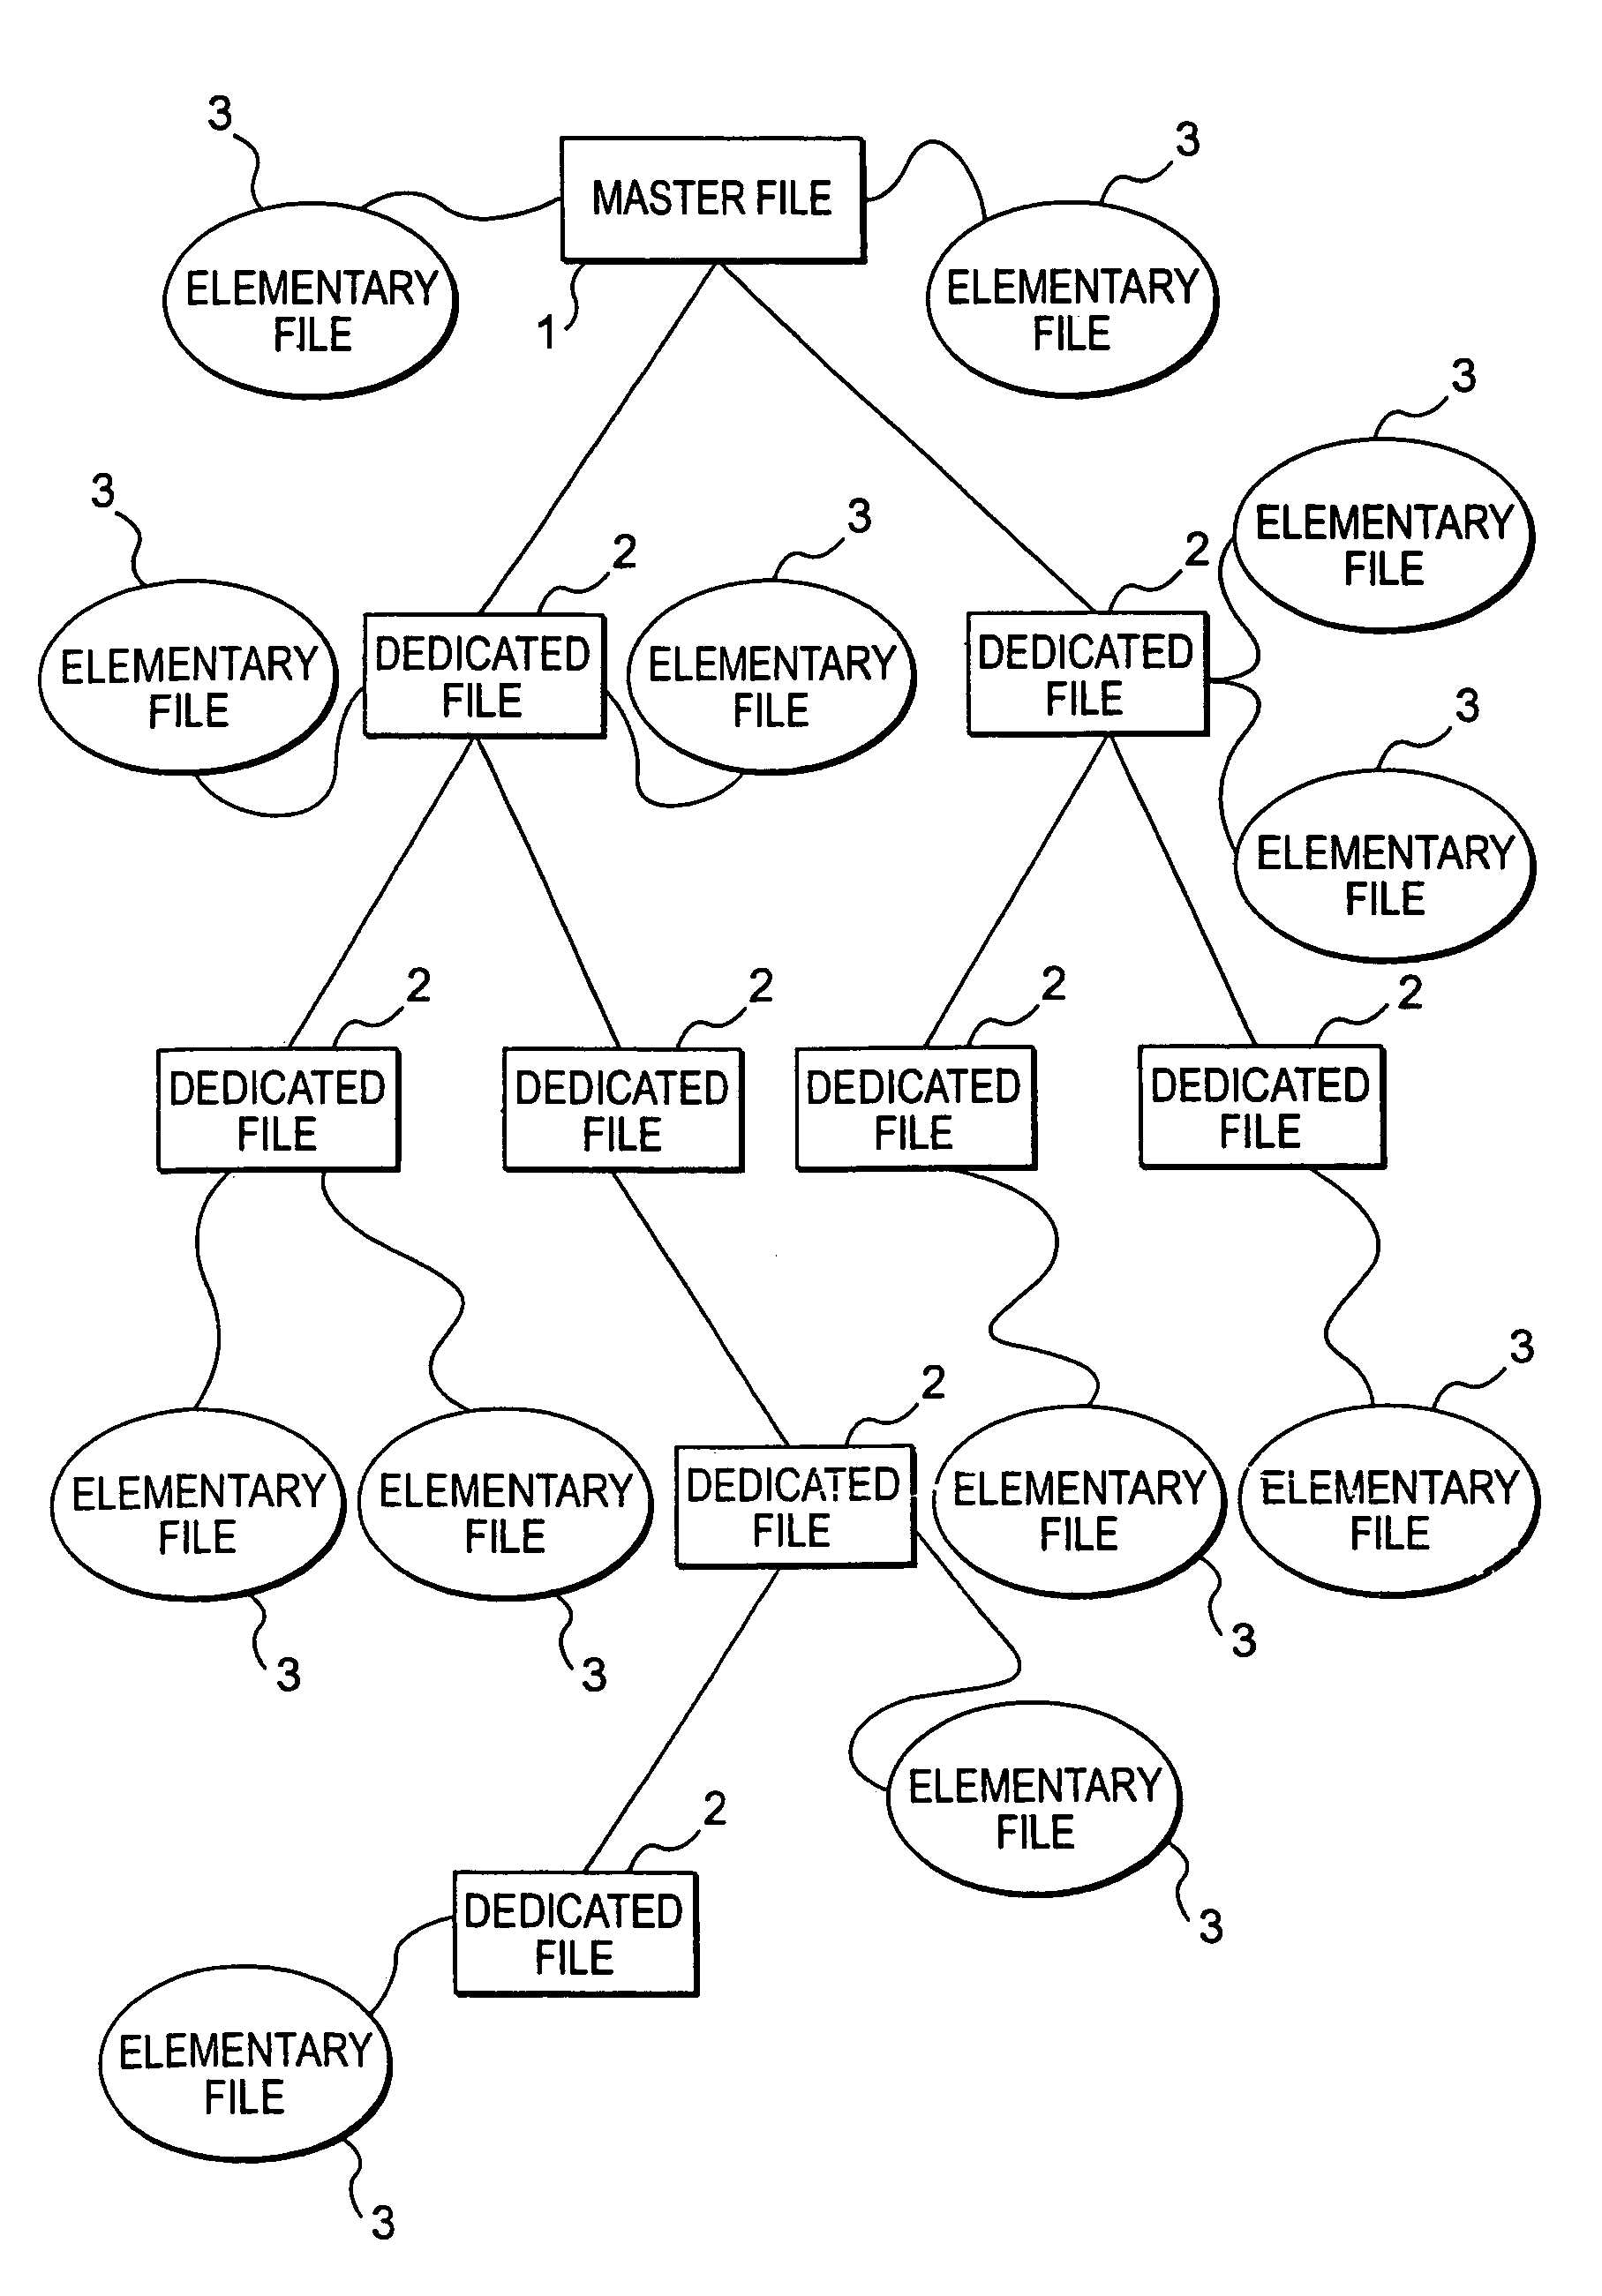 Data exchange system comprising portable data processing units